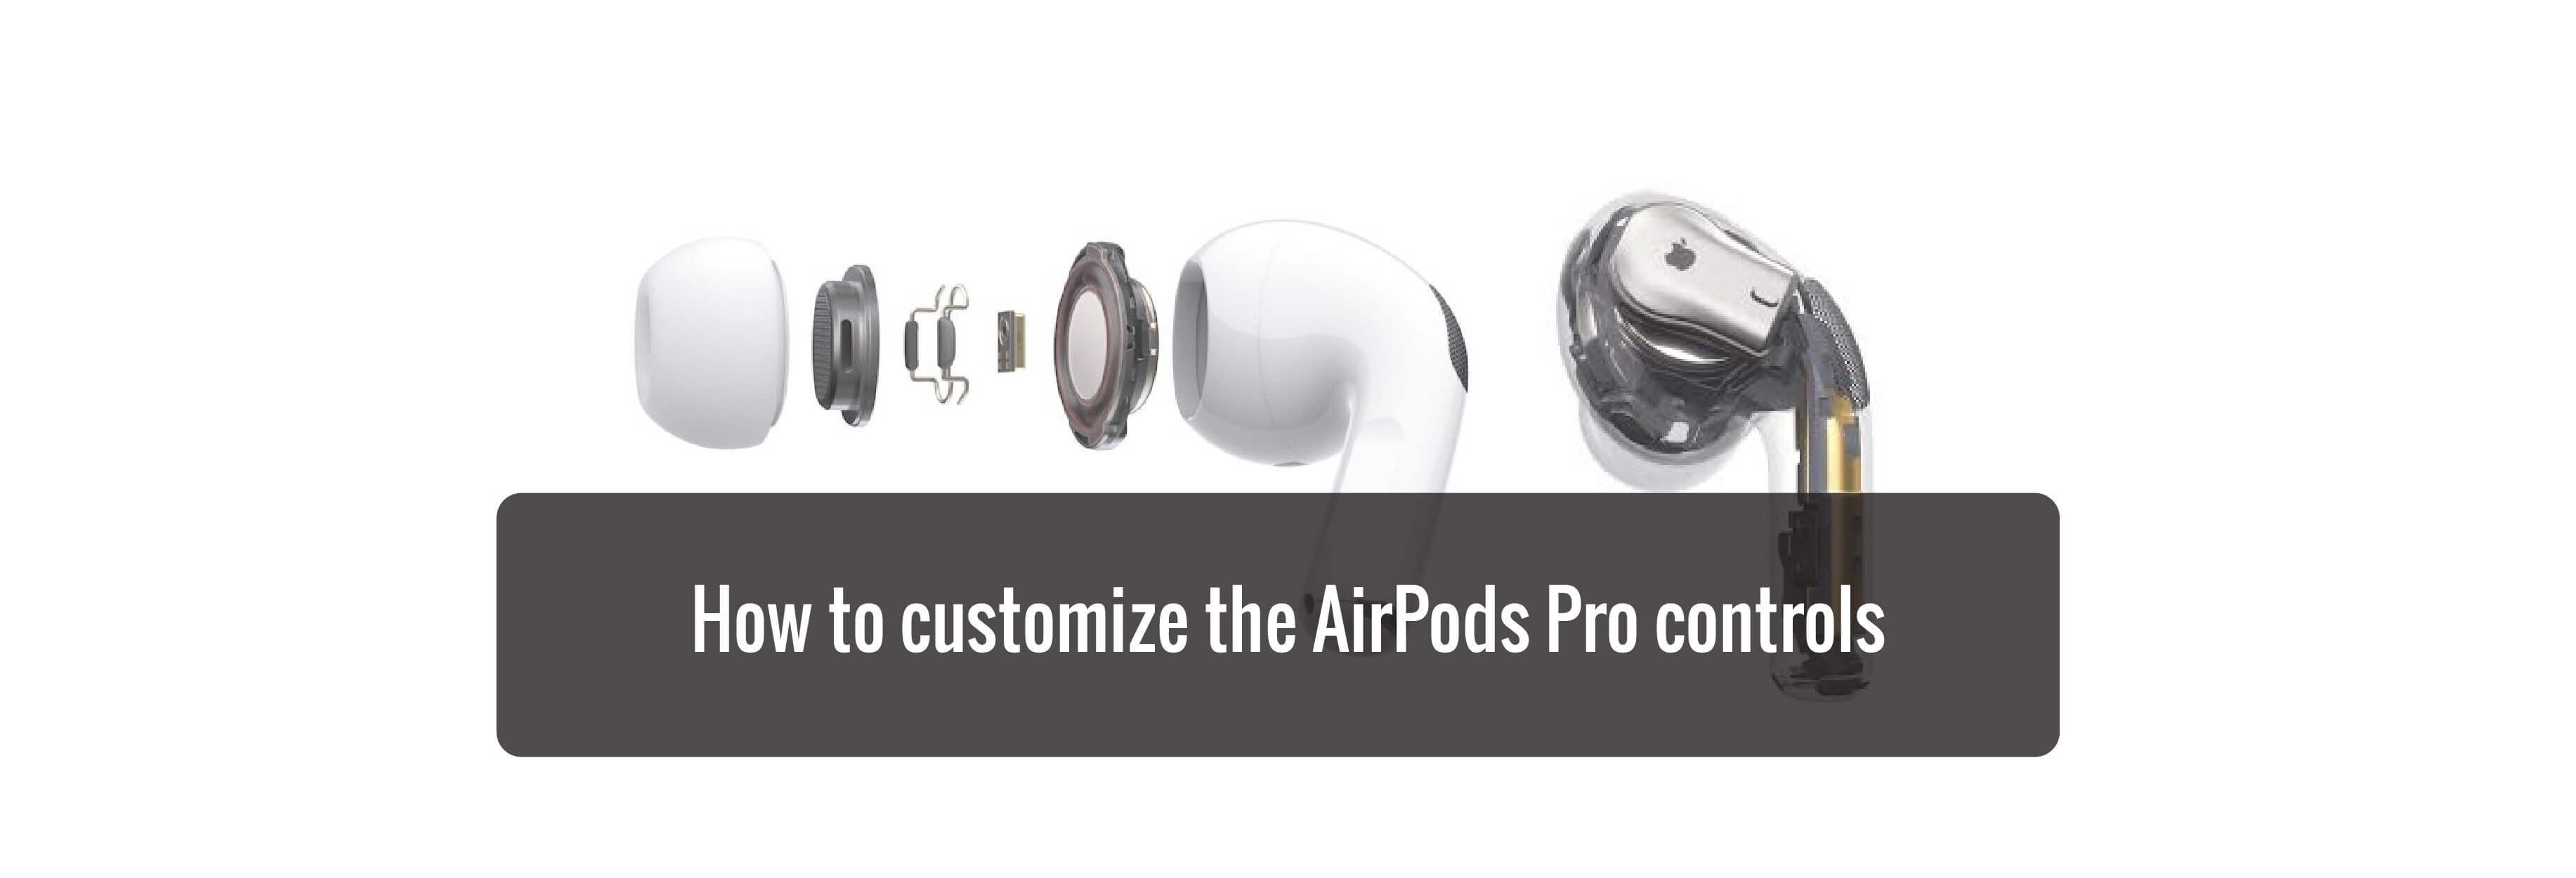 How to customize the AirPods Pro controls